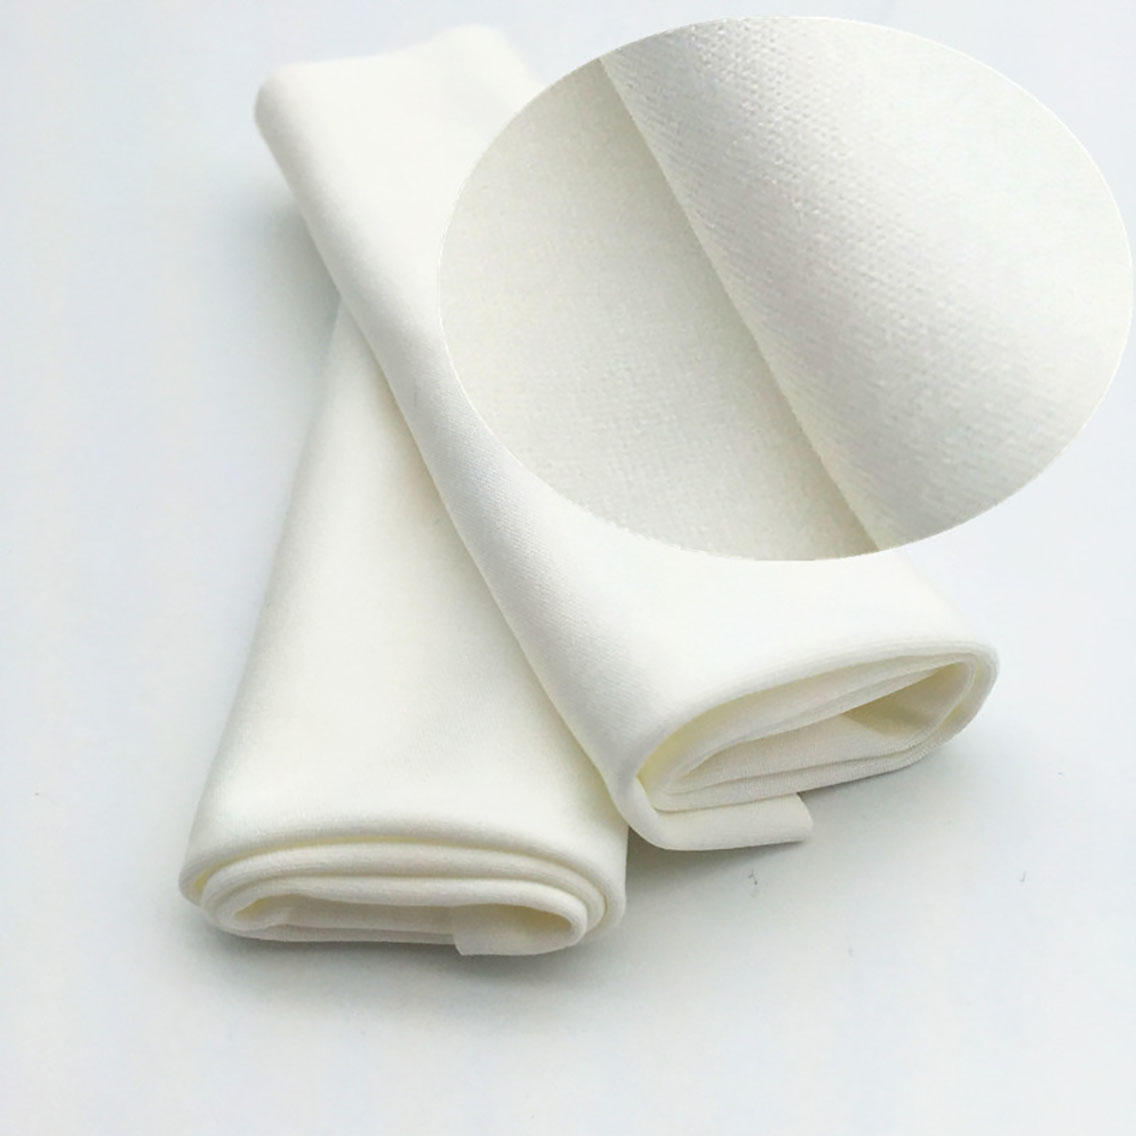 Cleanmo good quality lens cloth factory for medical device products